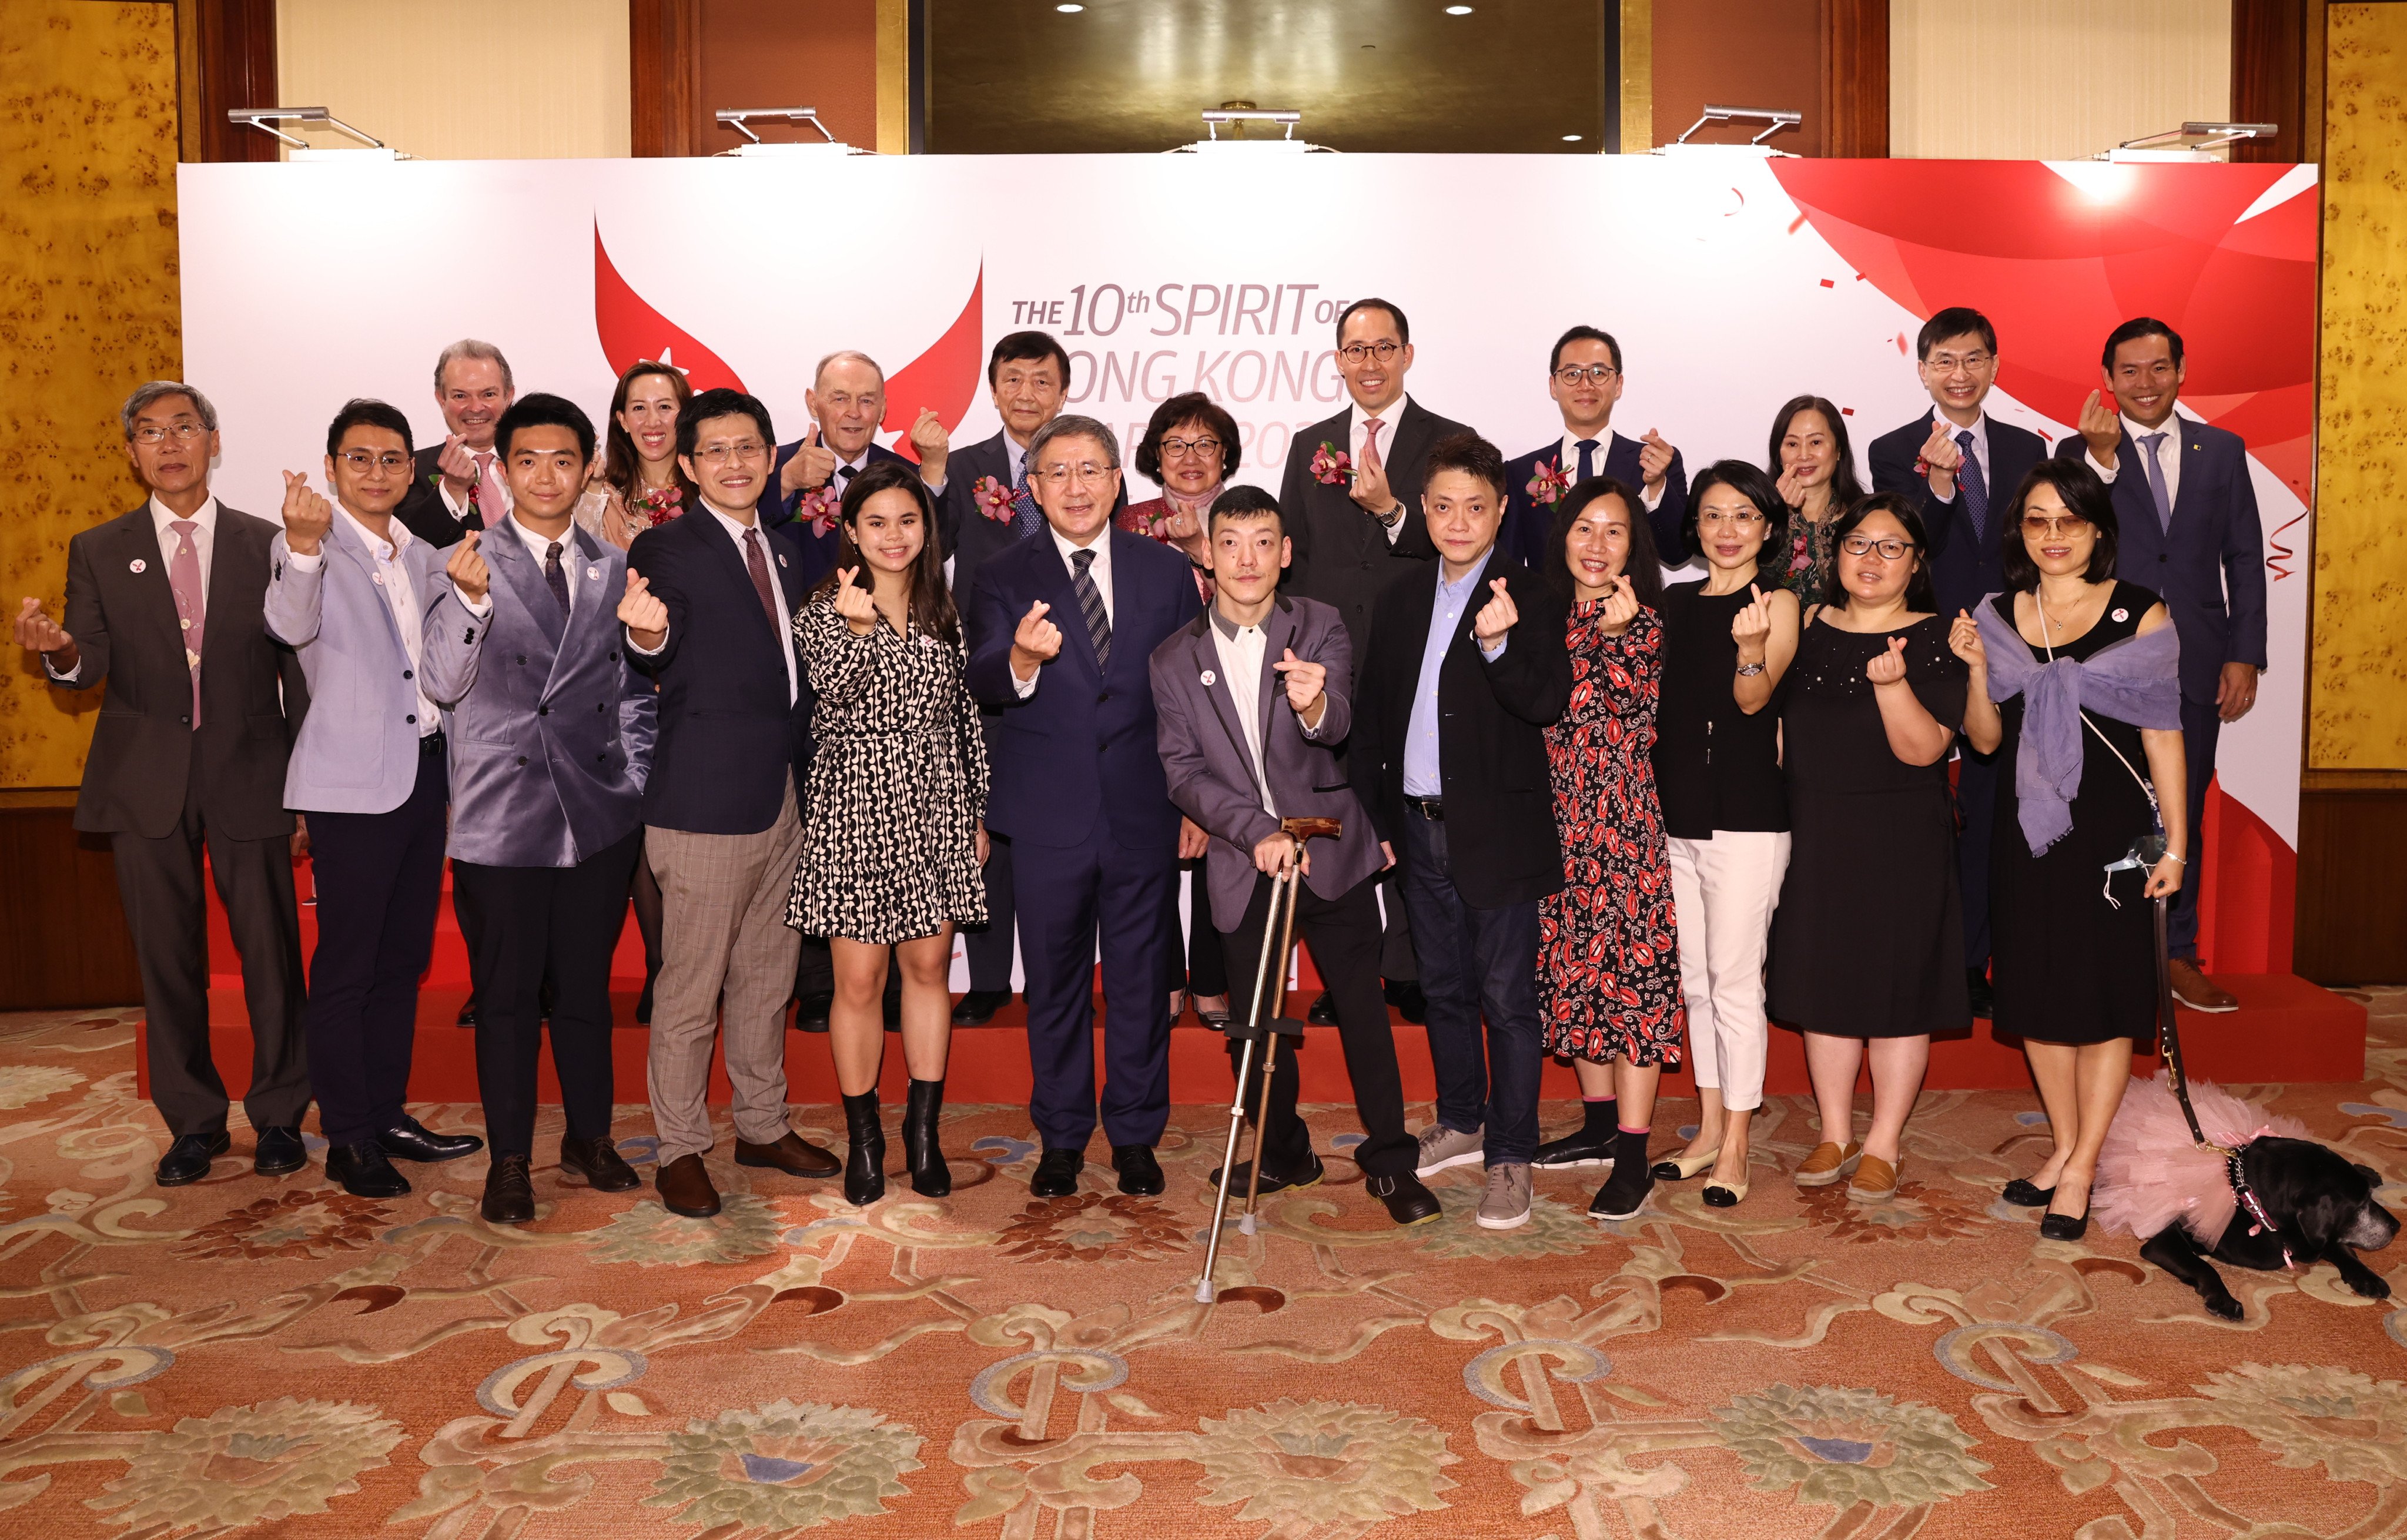 Judges and winners from last year’s Spirit of Hong Kong Awards. Photo: K. Y. Cheng